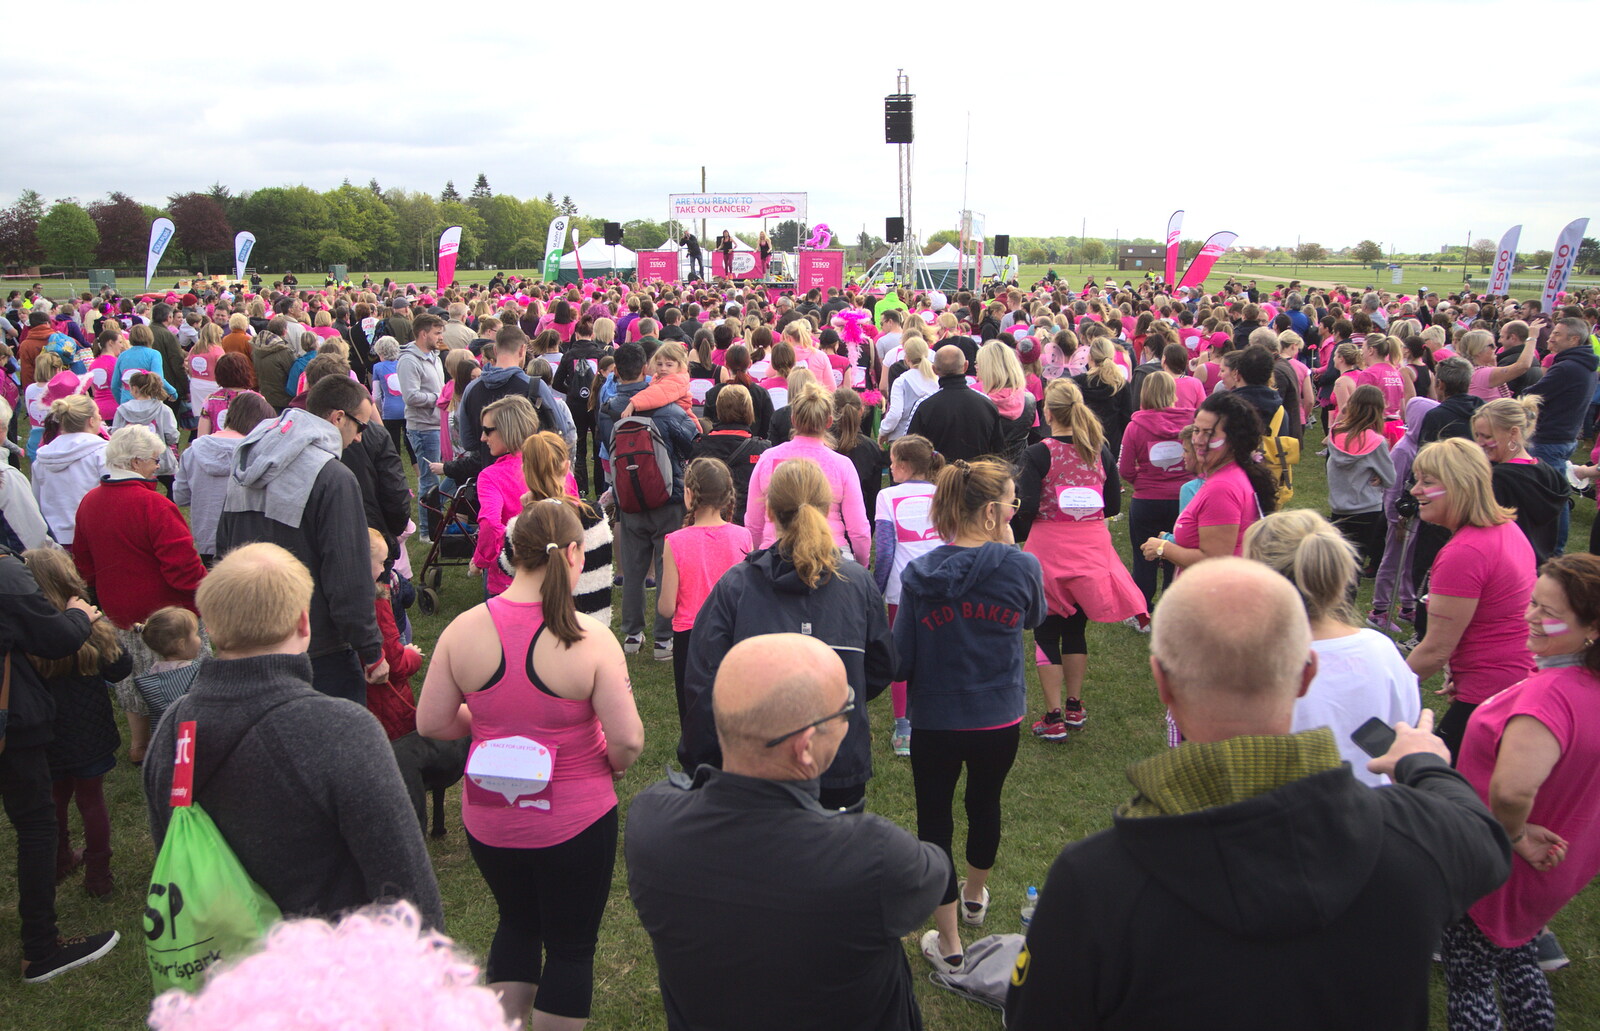 A view of the crowd from Isobel's Race for Life, Costessey, Norwich - 15th May 2016